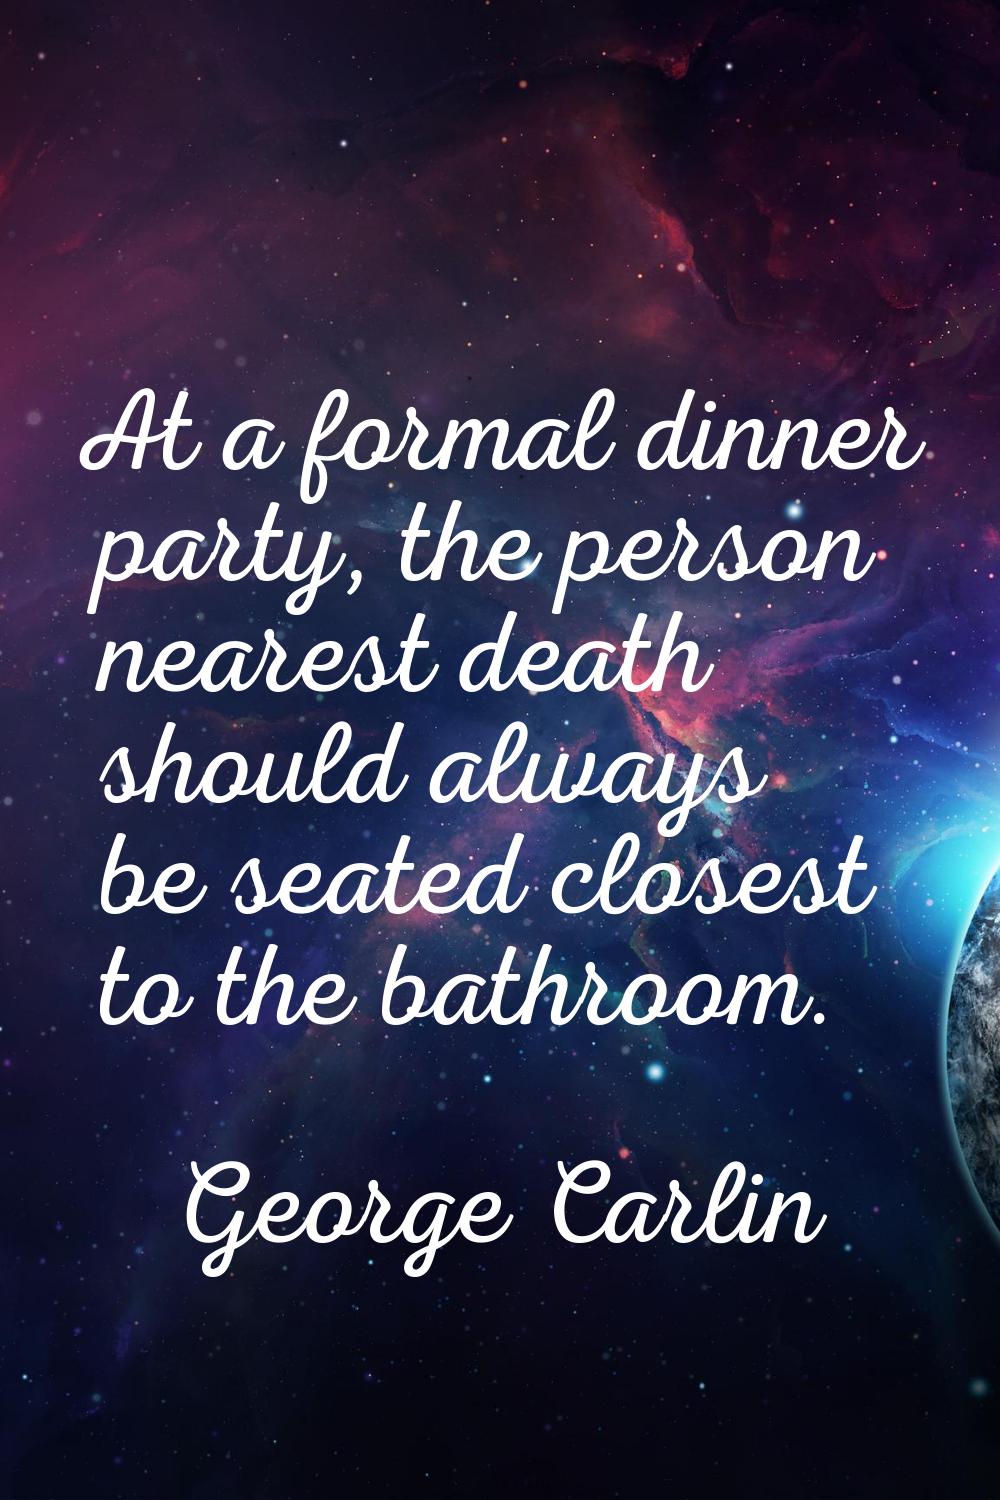 At a formal dinner party, the person nearest death should always be seated closest to the bathroom.